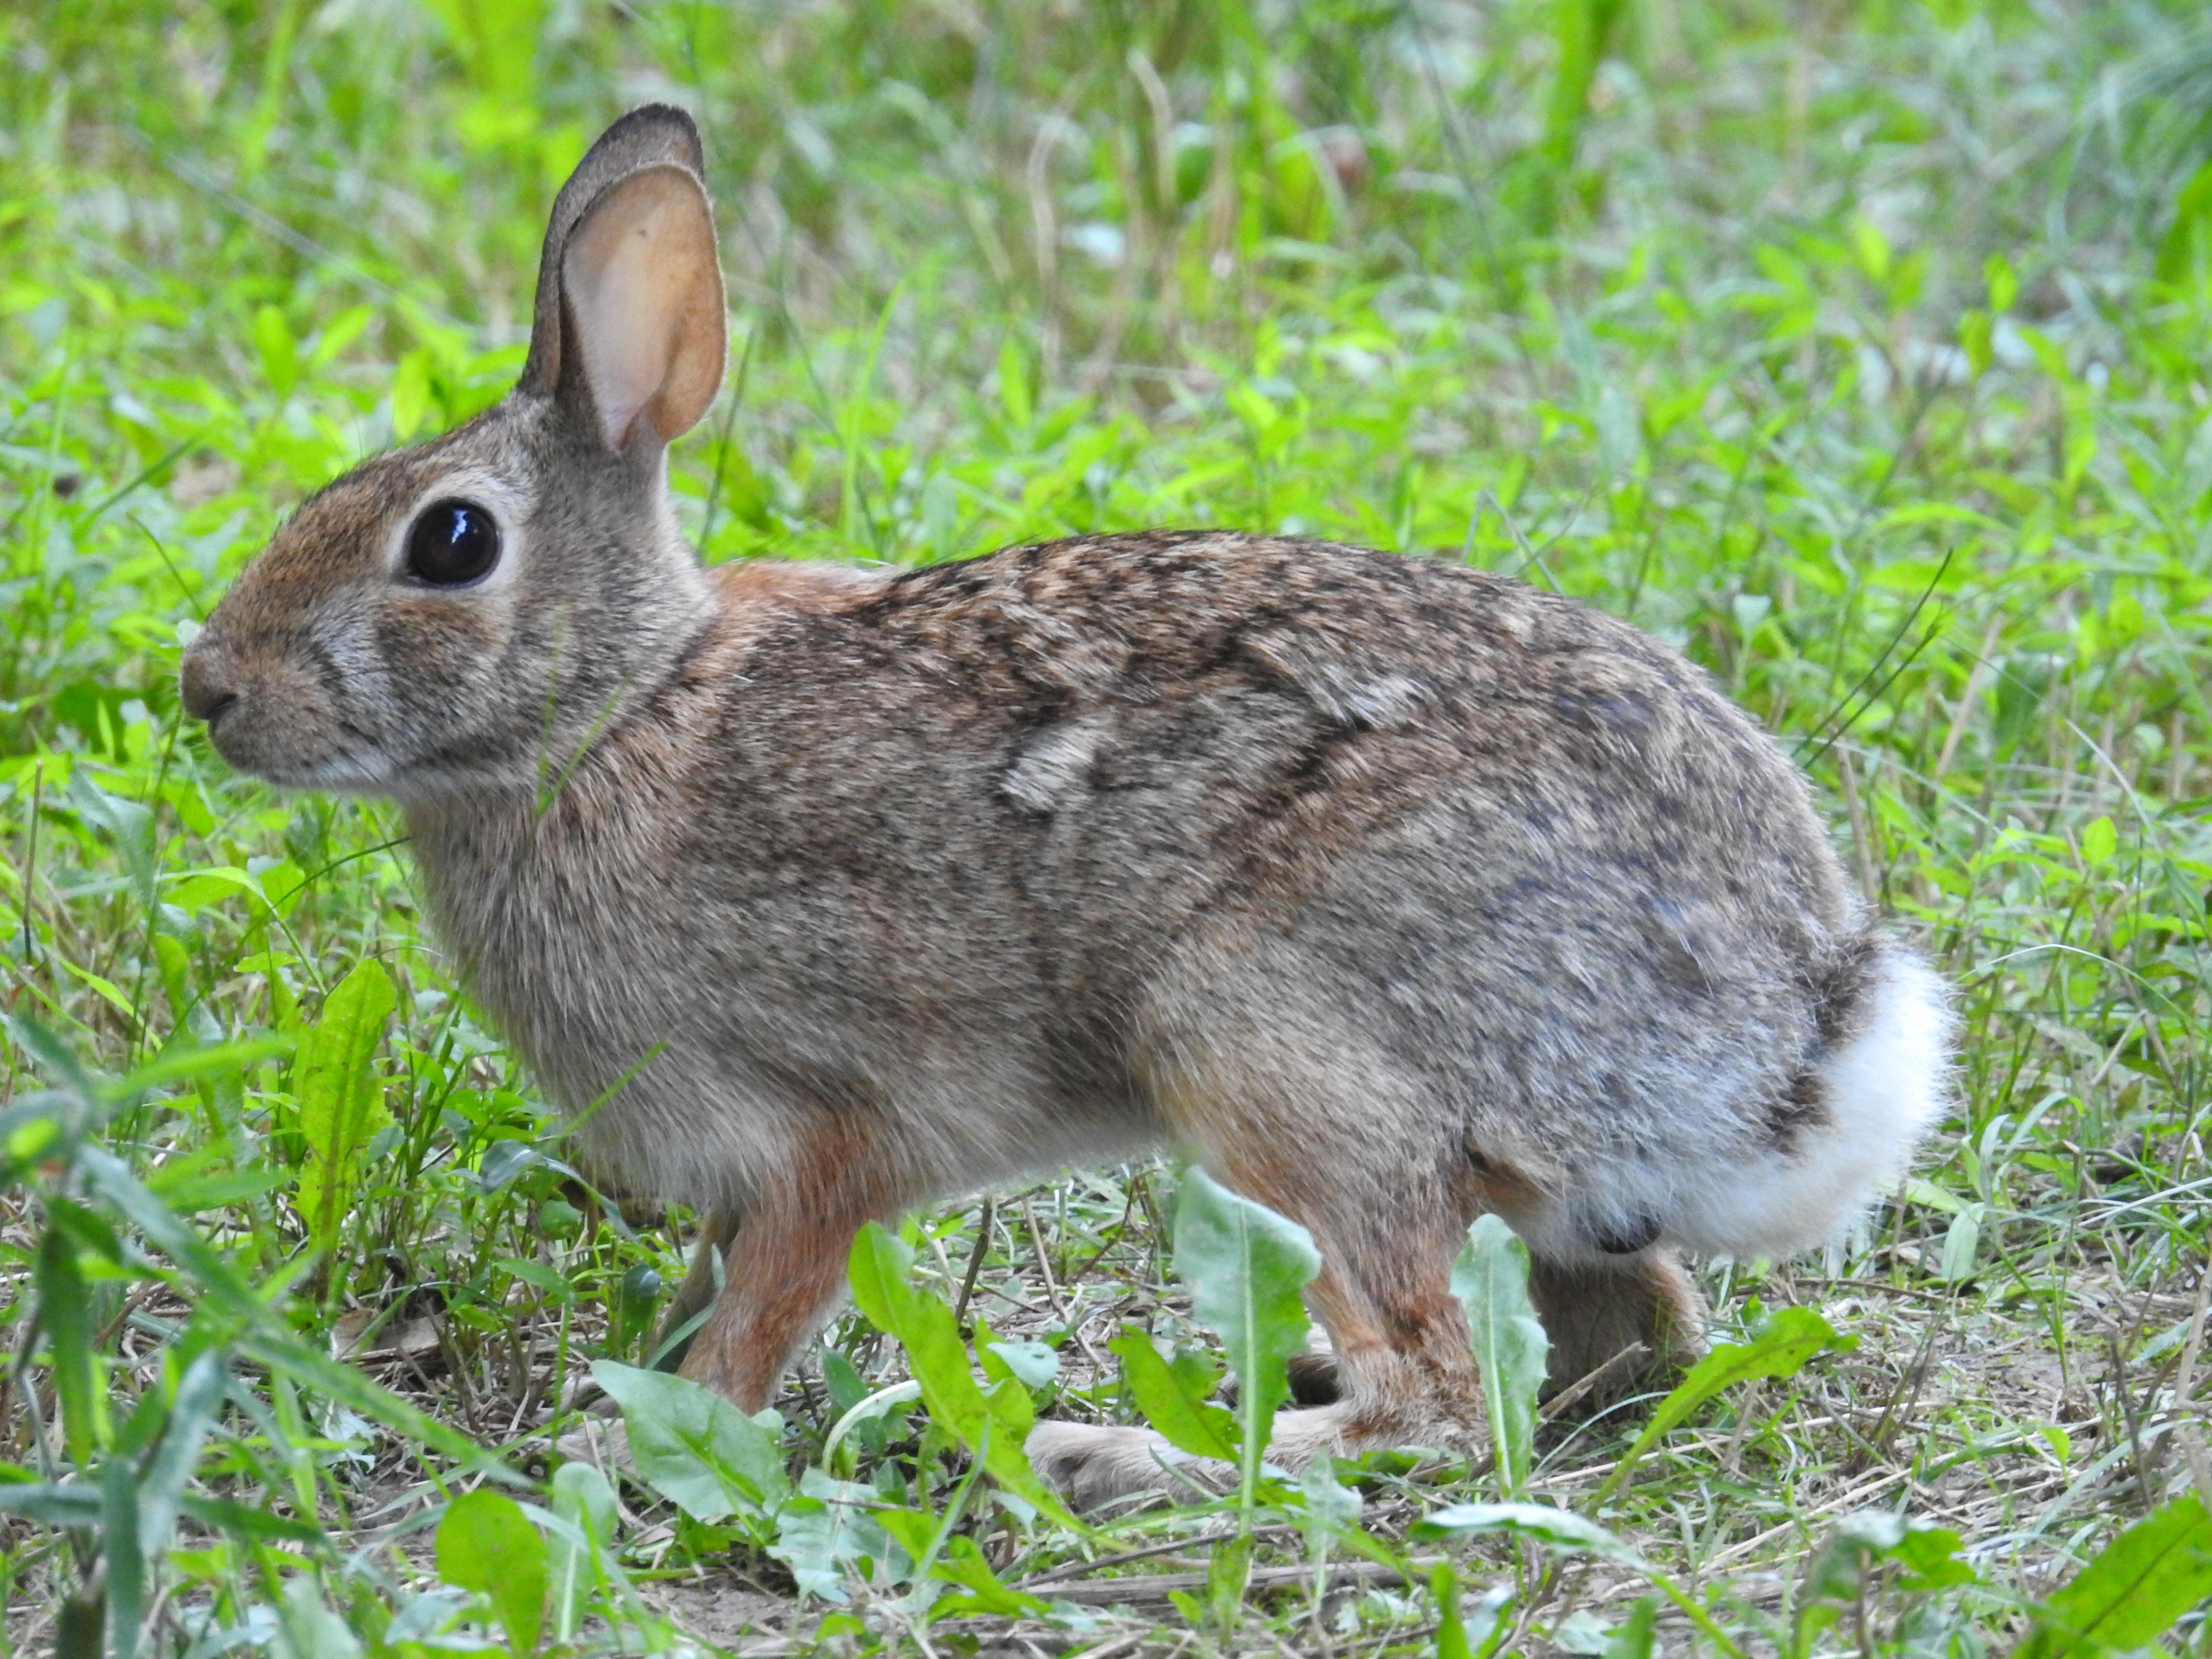 A rabbit sits in the grass